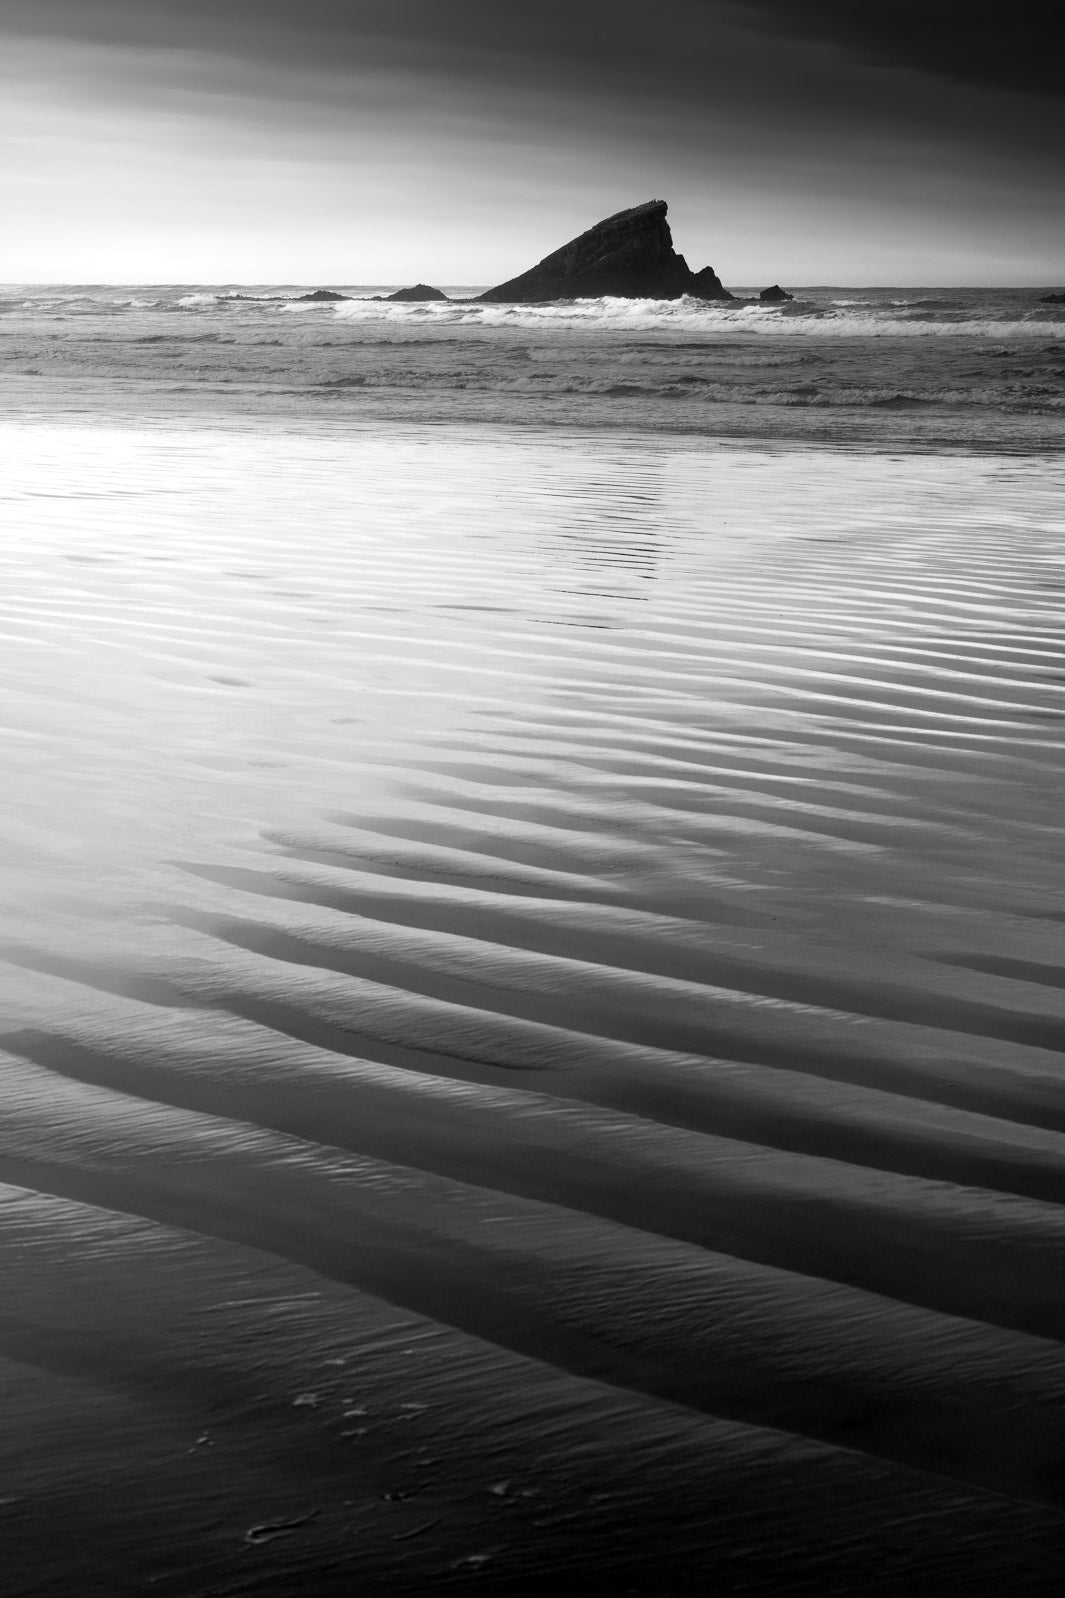 Rippled sand leading to the waves in the sea with a rock in the water.